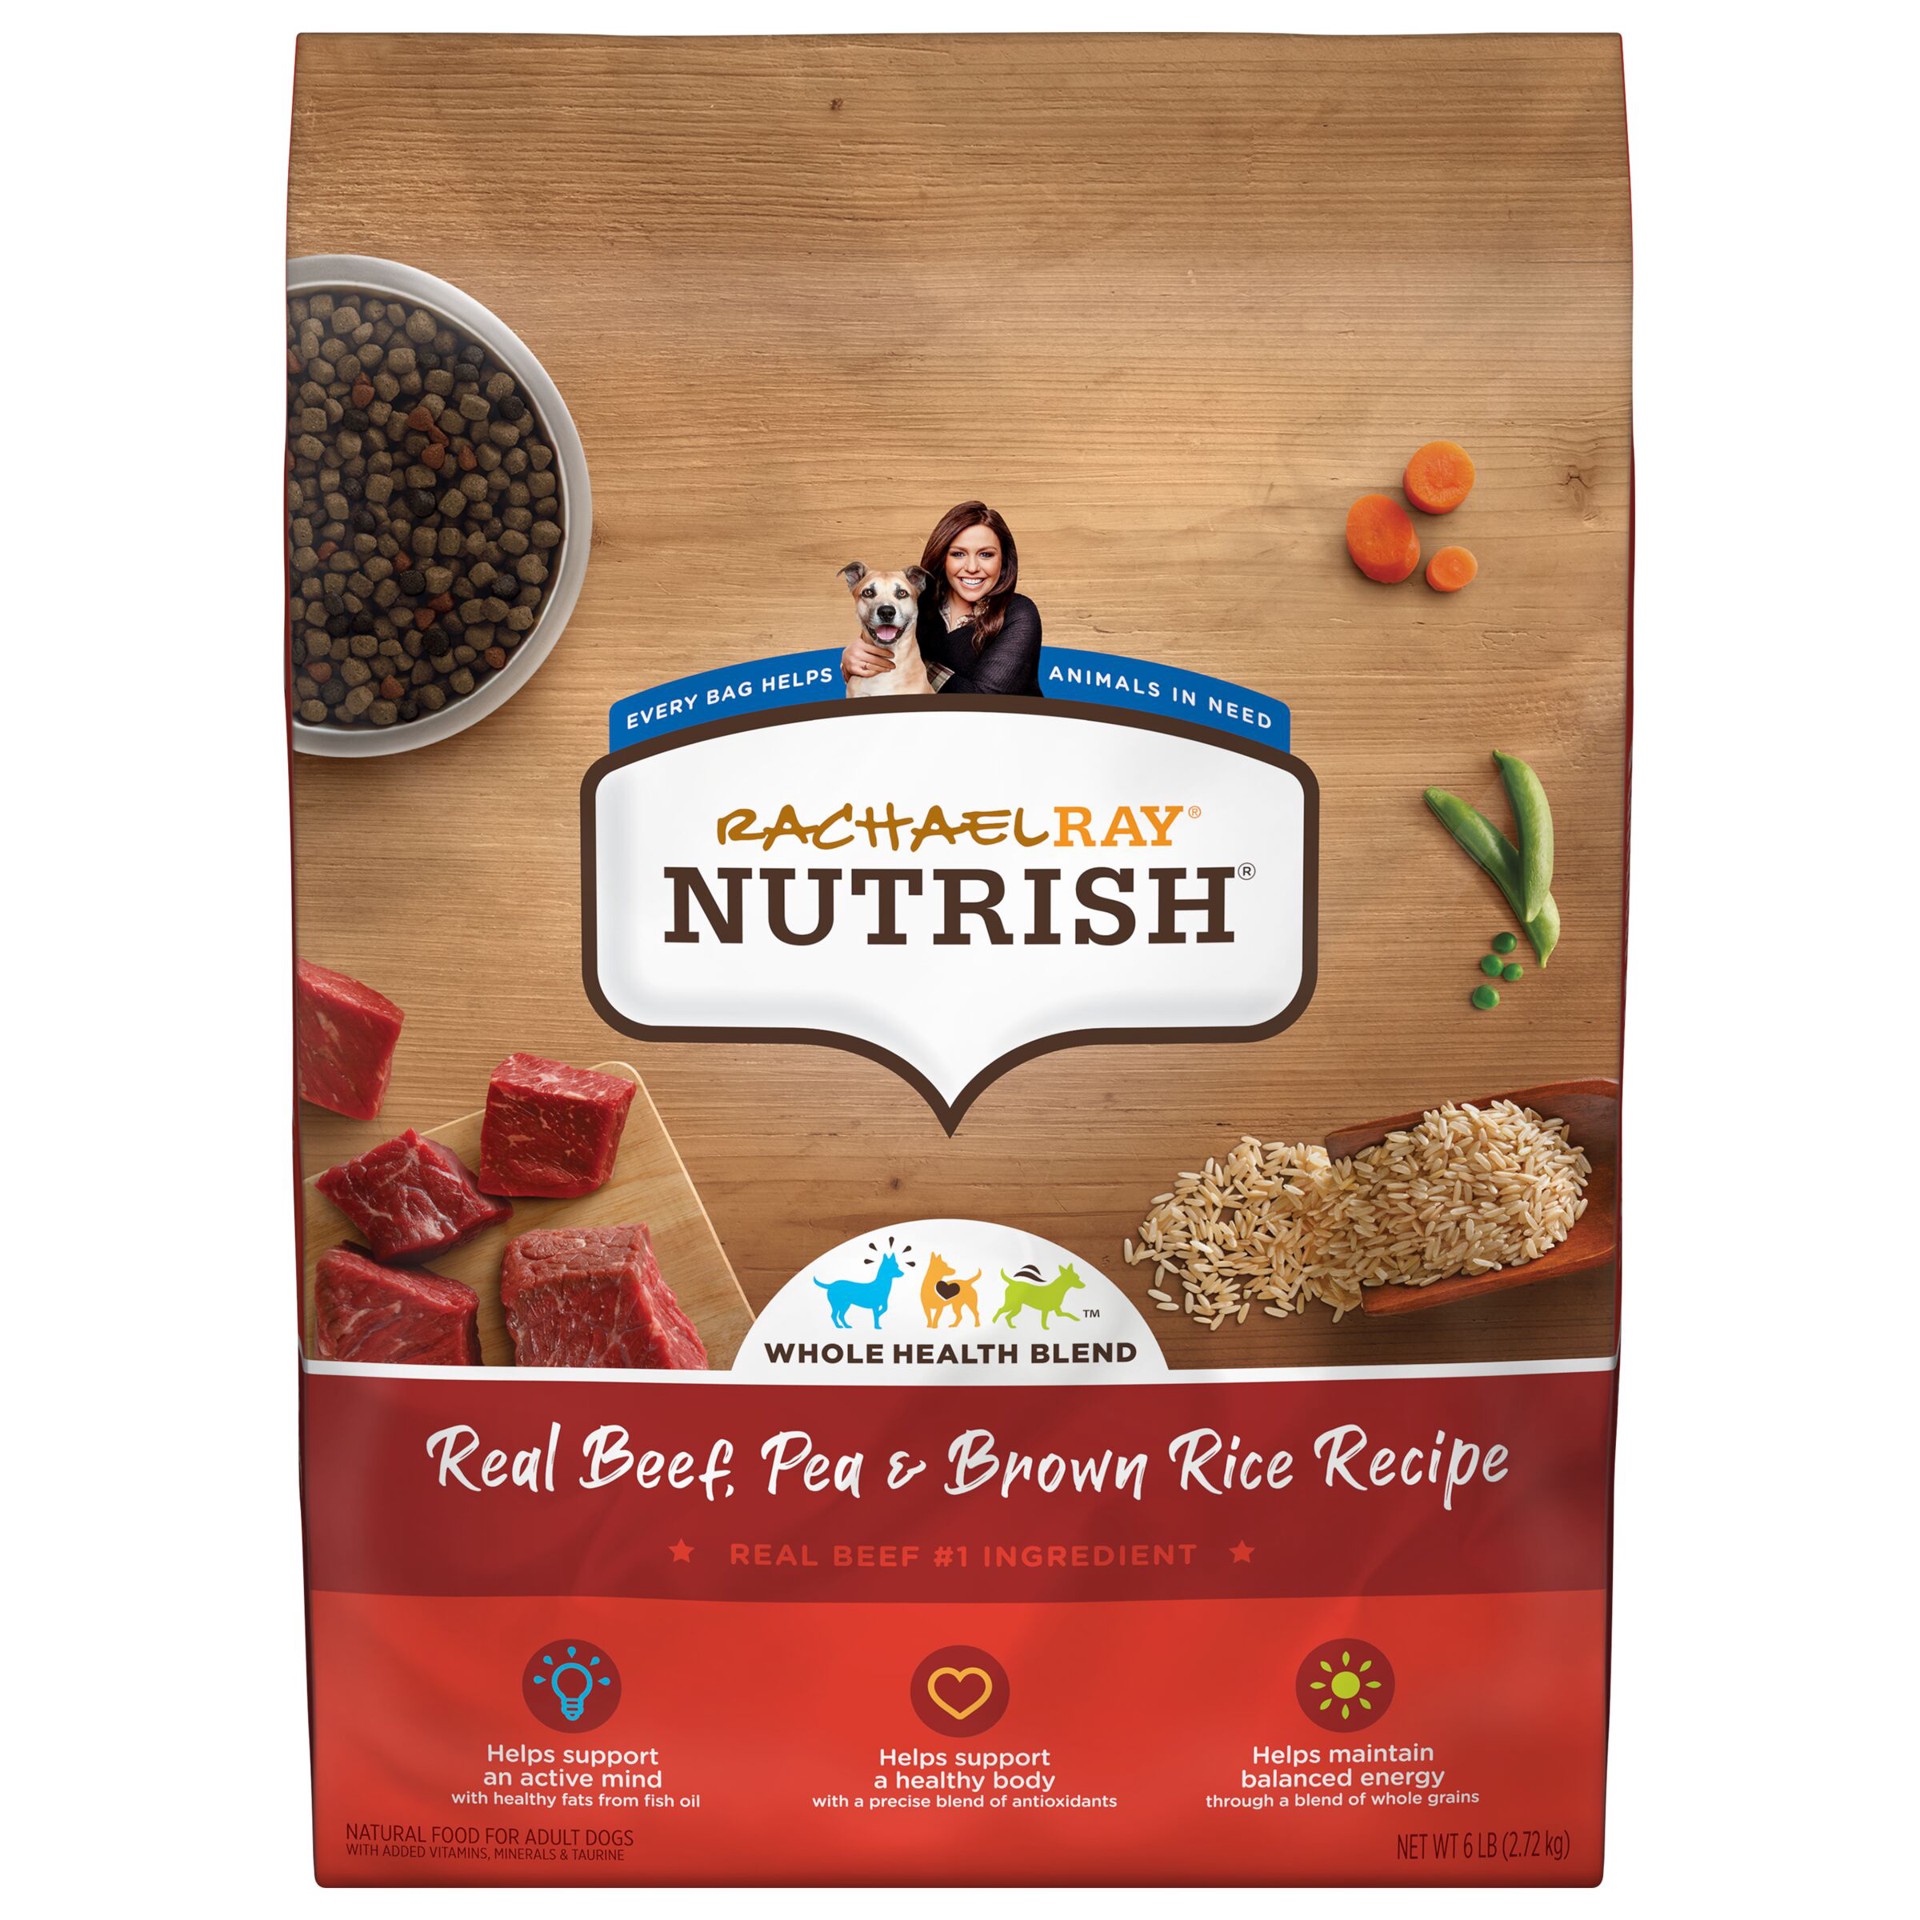 slide 1 of 10, Rachael Ray Nutrish Whole Health Blend Real Beef, Pea & Brown Rice Recipe Dry Dog Food, 6 lb. Bag, 6 lb